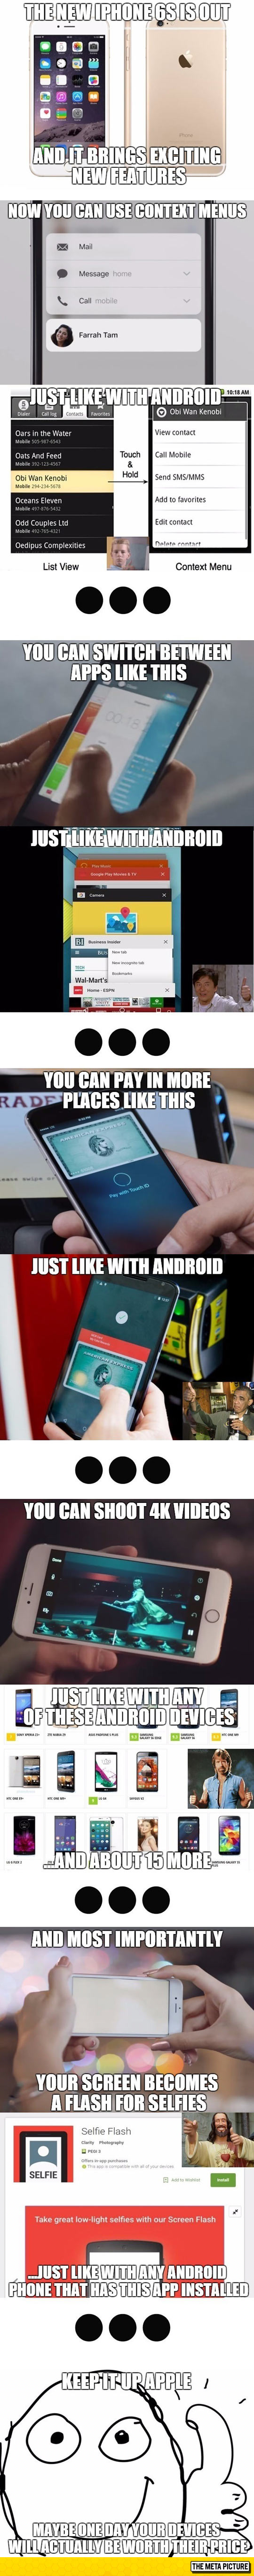 funny-Apple-new-phone-vs-Android